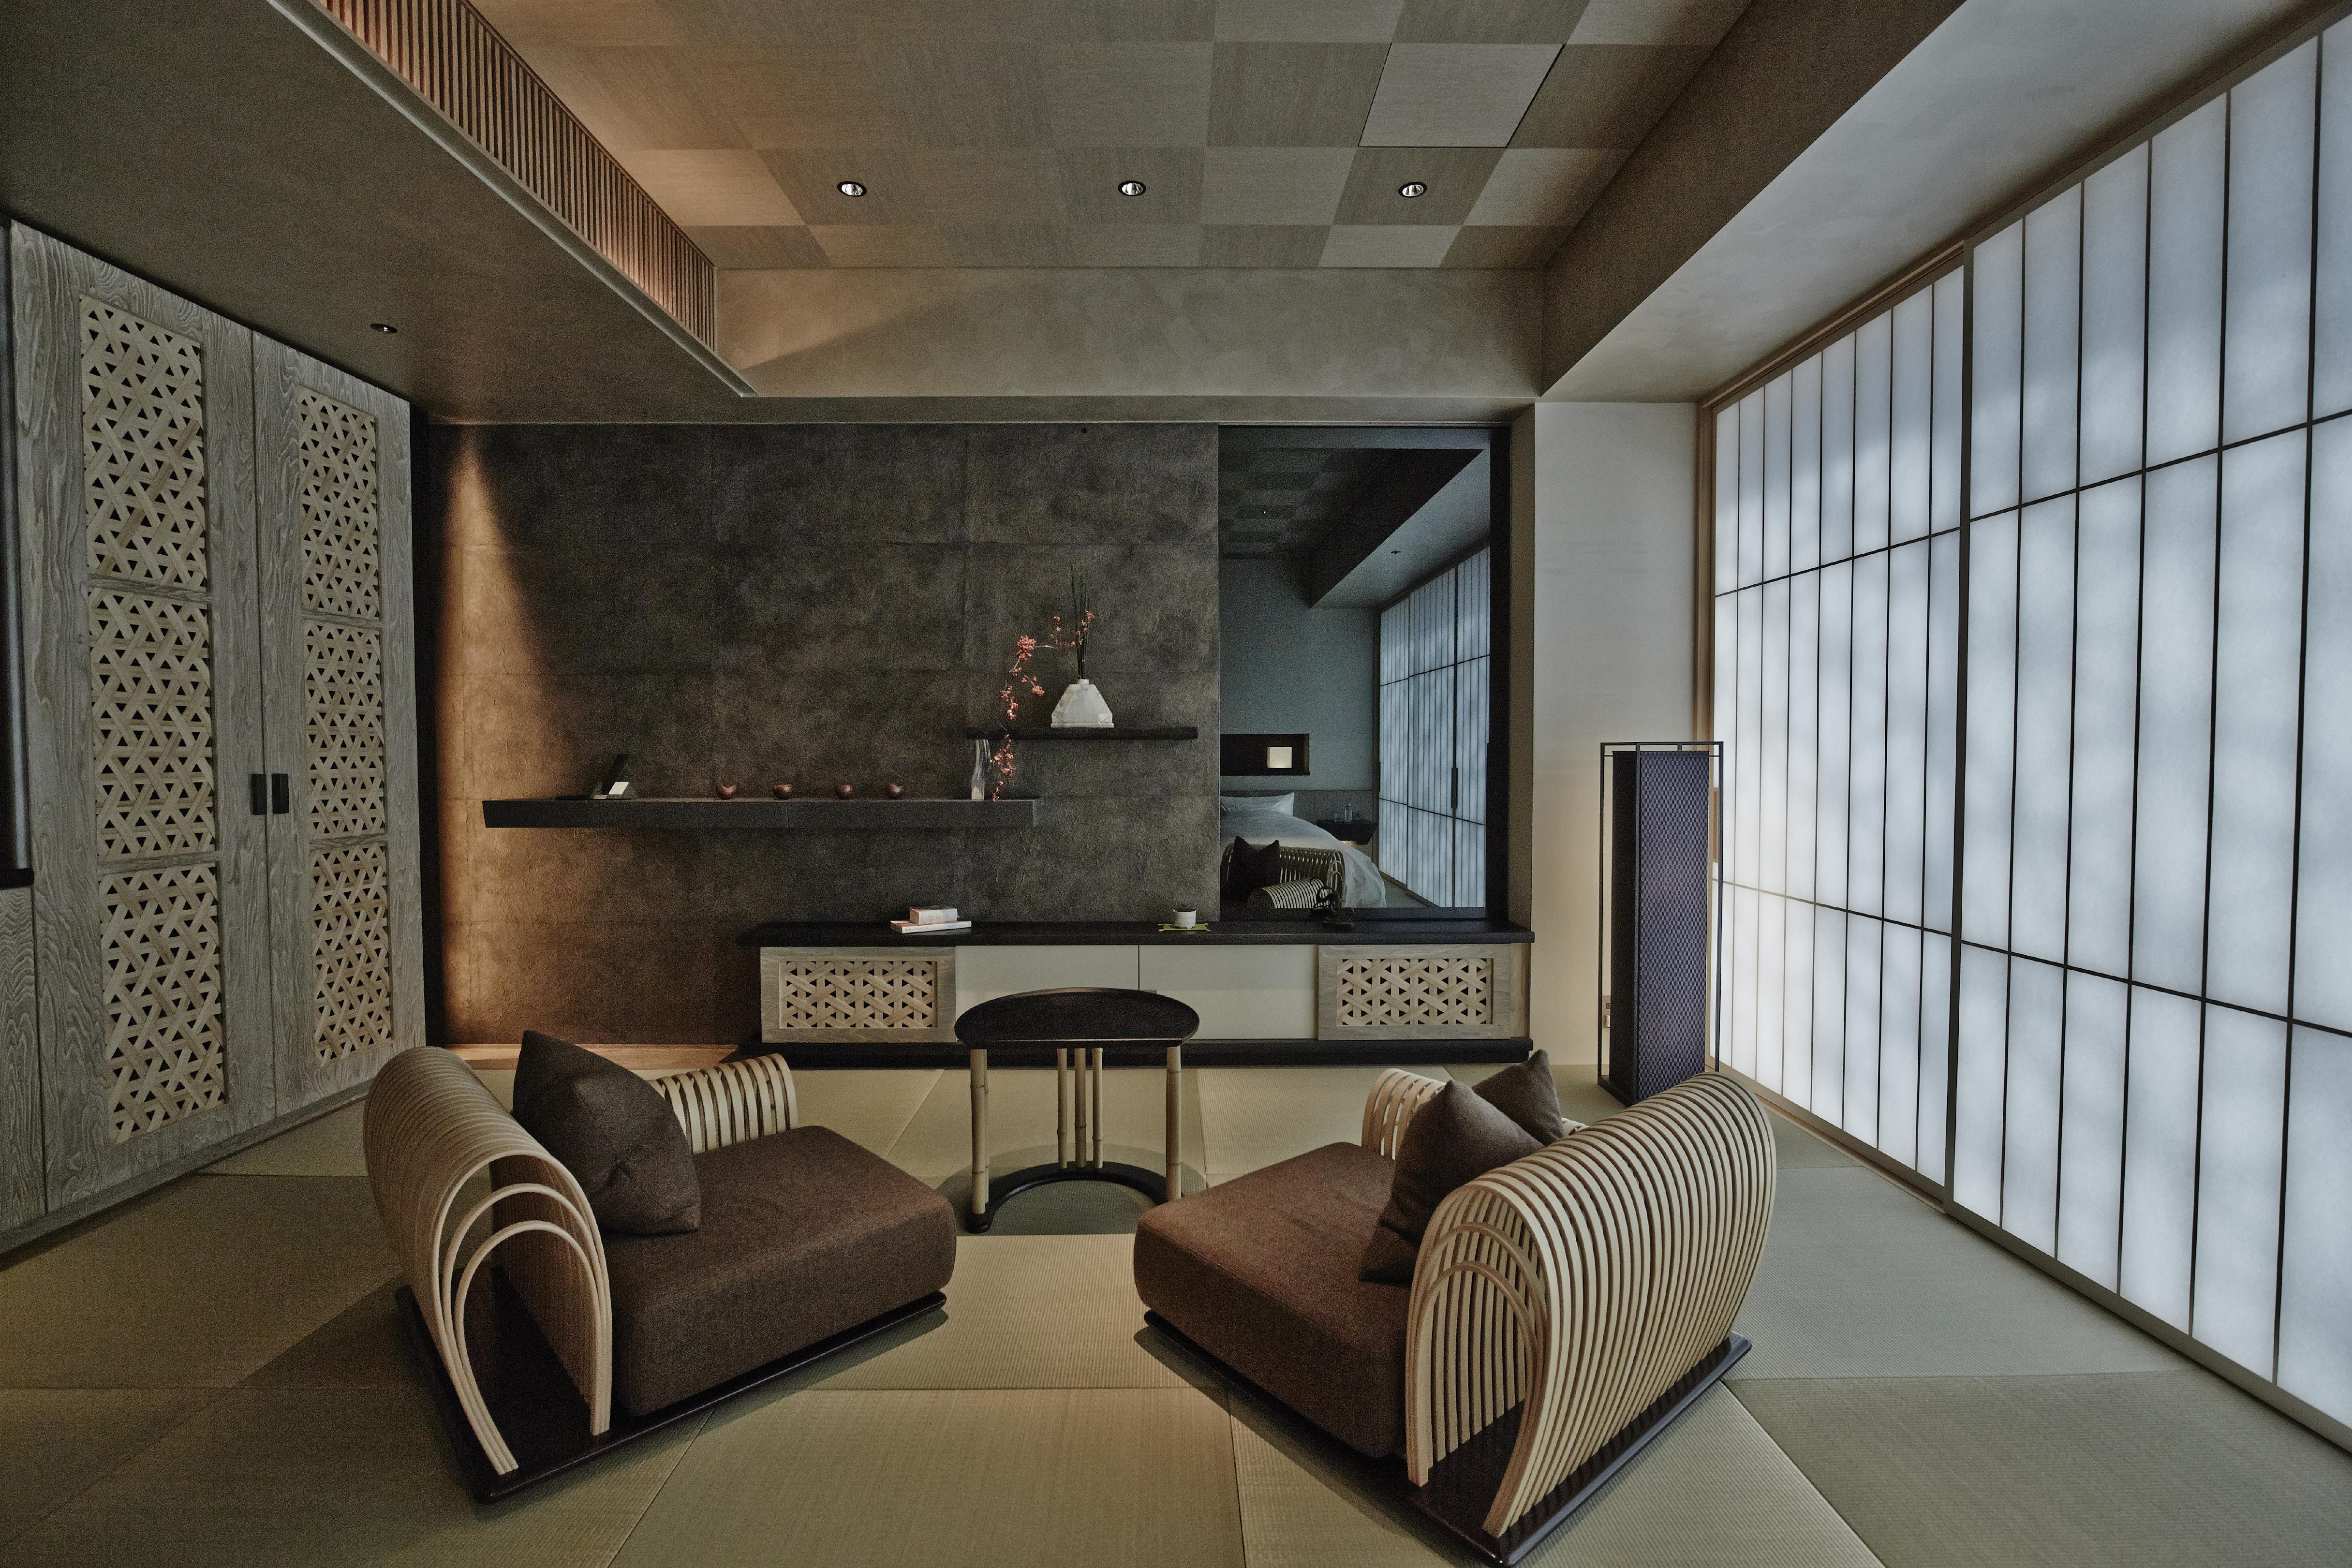 Tokyo hotels invite guests to live in the lap of luxury - The